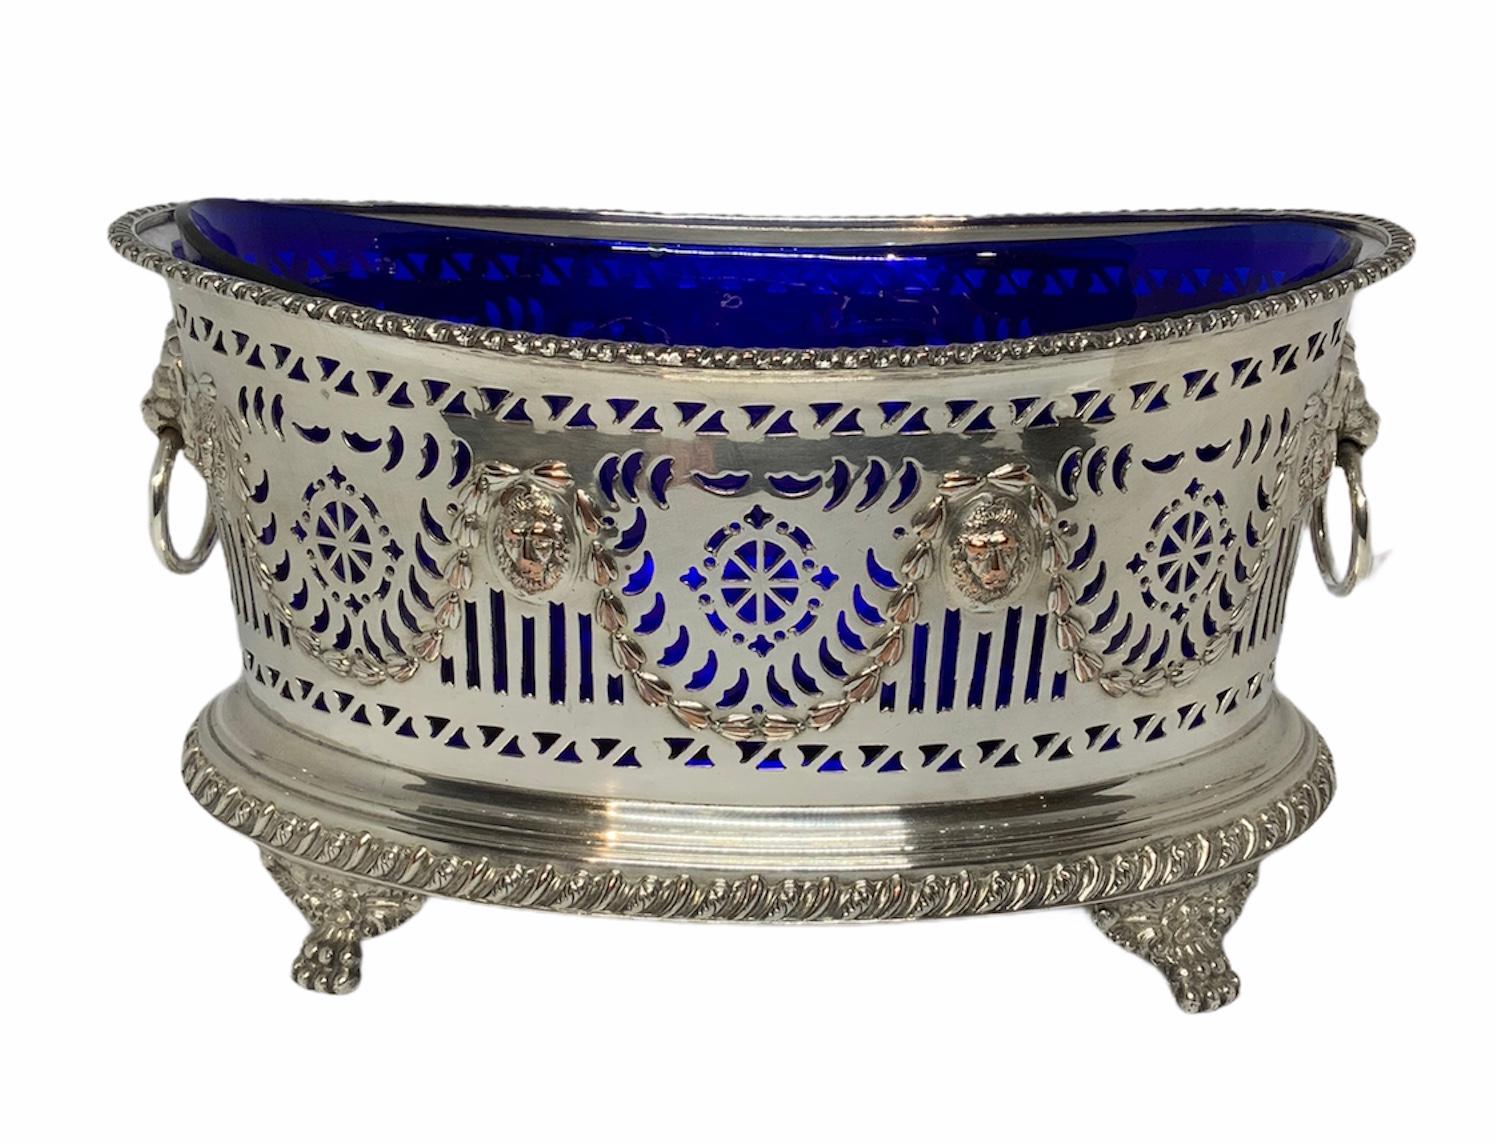 This an Empire style silver plate cobalt blue glass oval bowl centerpiece. The reticulated bowl is decorated with a garland of laurel leaves alternated by a repousse mask of lions. The upper and lower borders of the bowl are highlighted by the